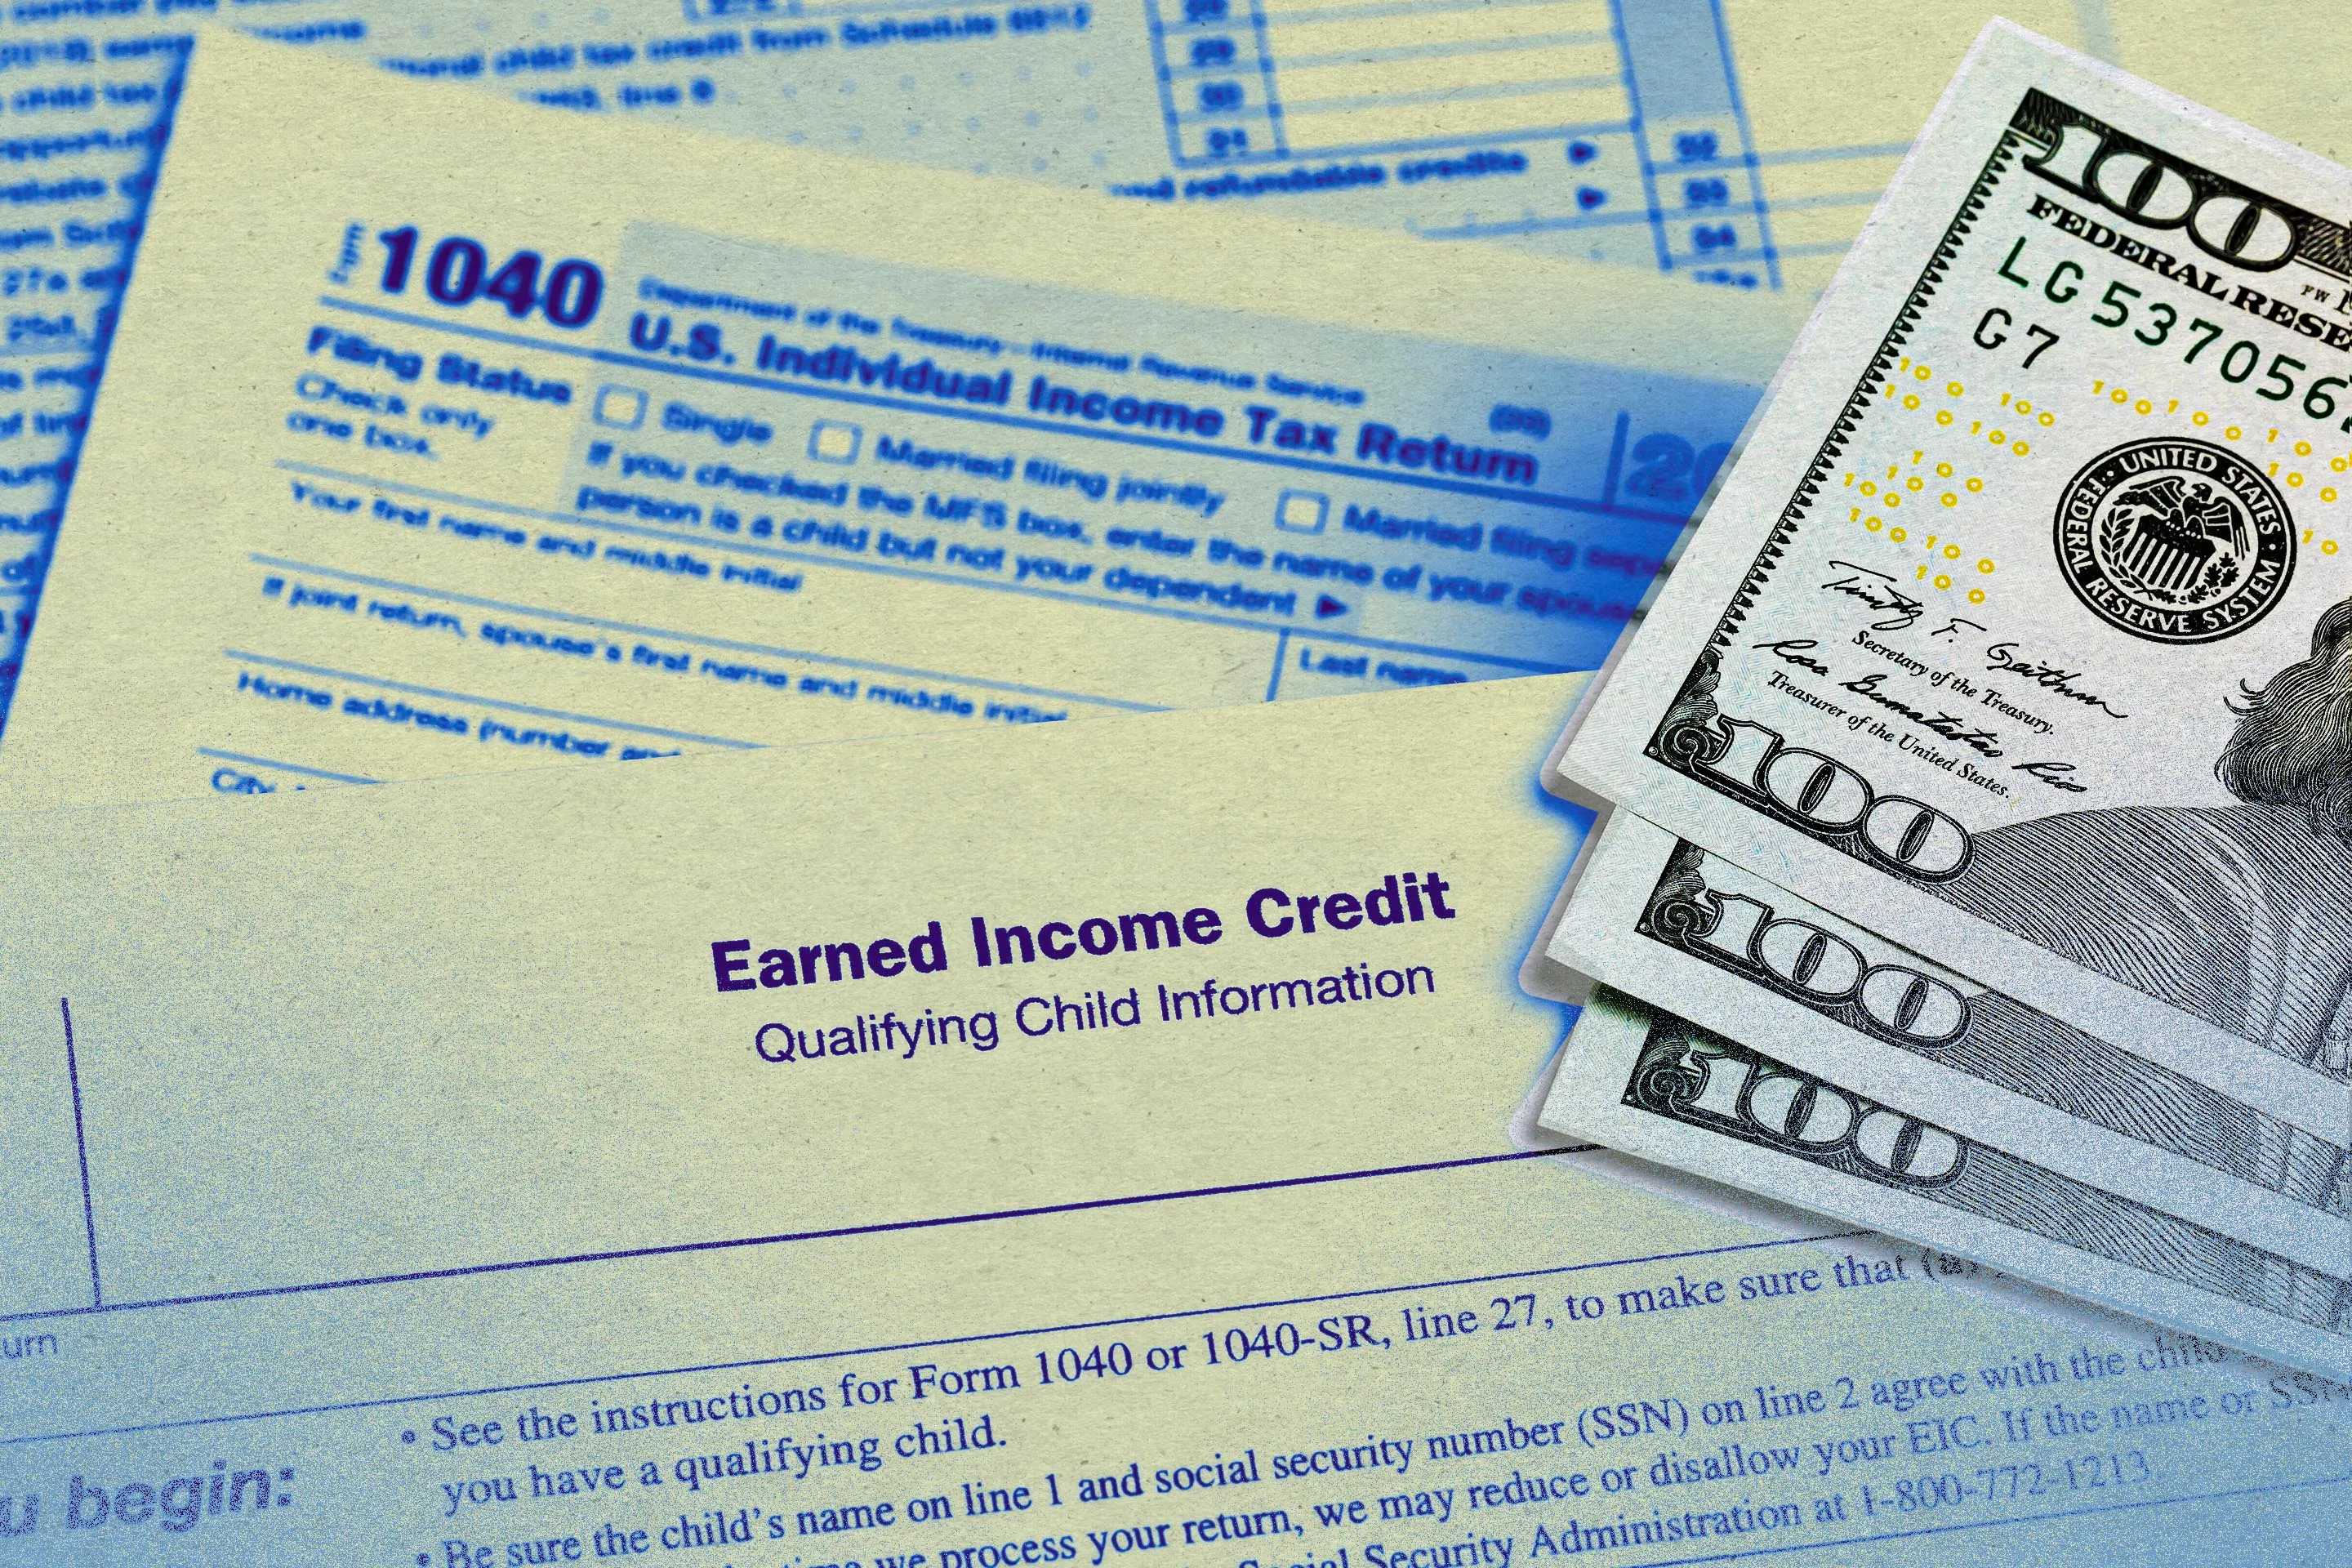 The IRS Is Sending Special Refund Checks to 1.6 Million Taxpayers This Month